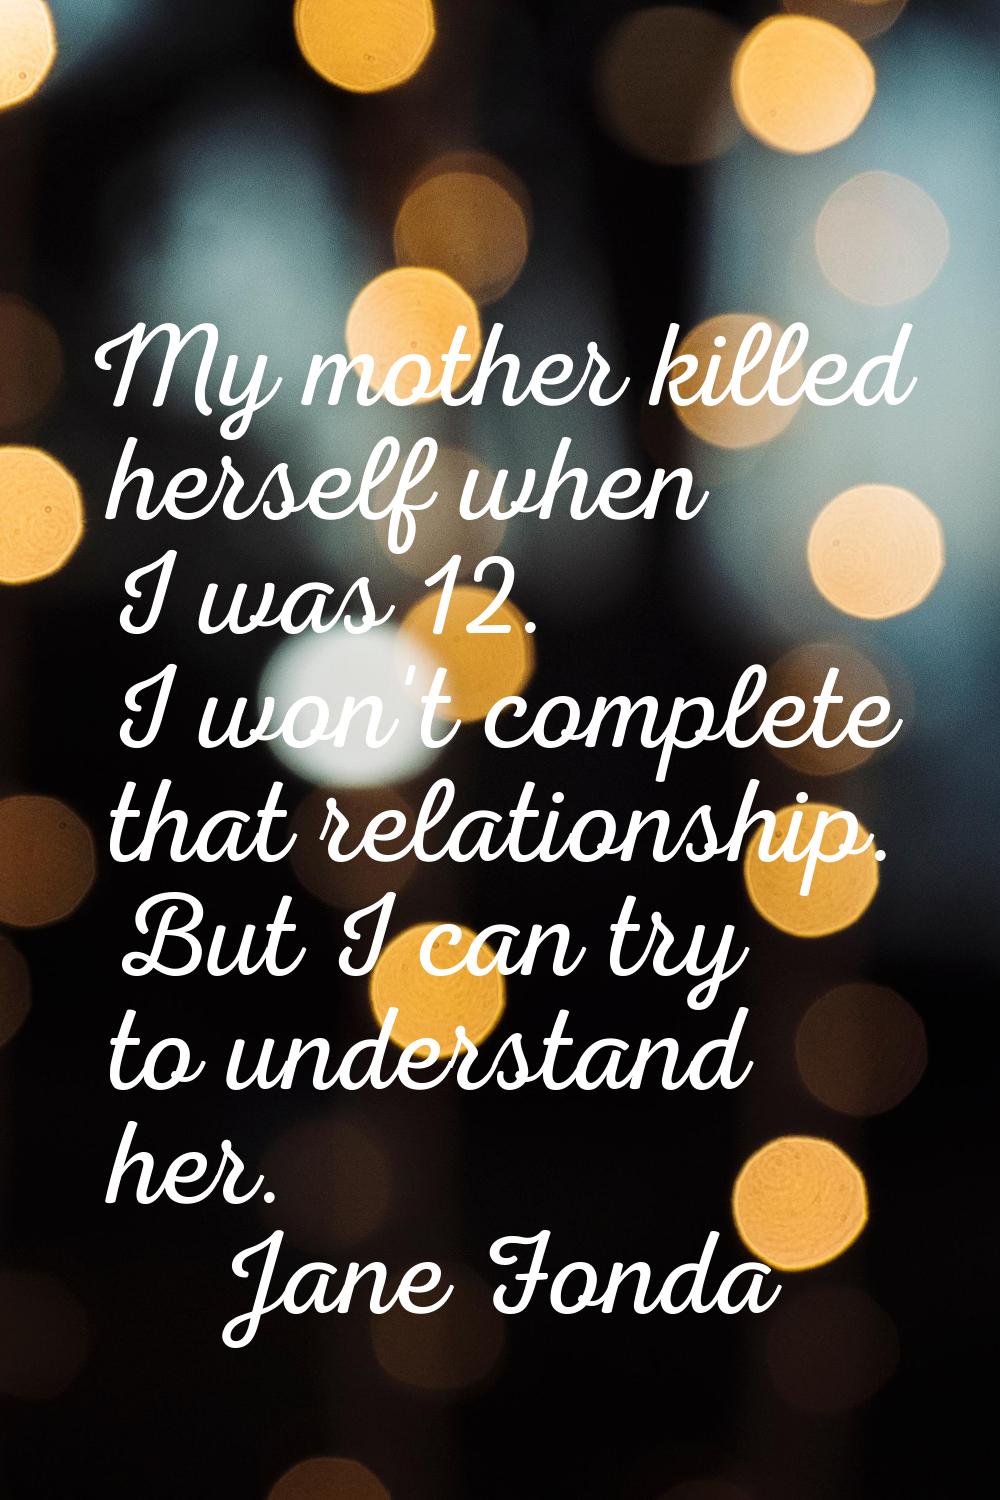 My mother killed herself when I was 12. I won't complete that relationship. But I can try to unders